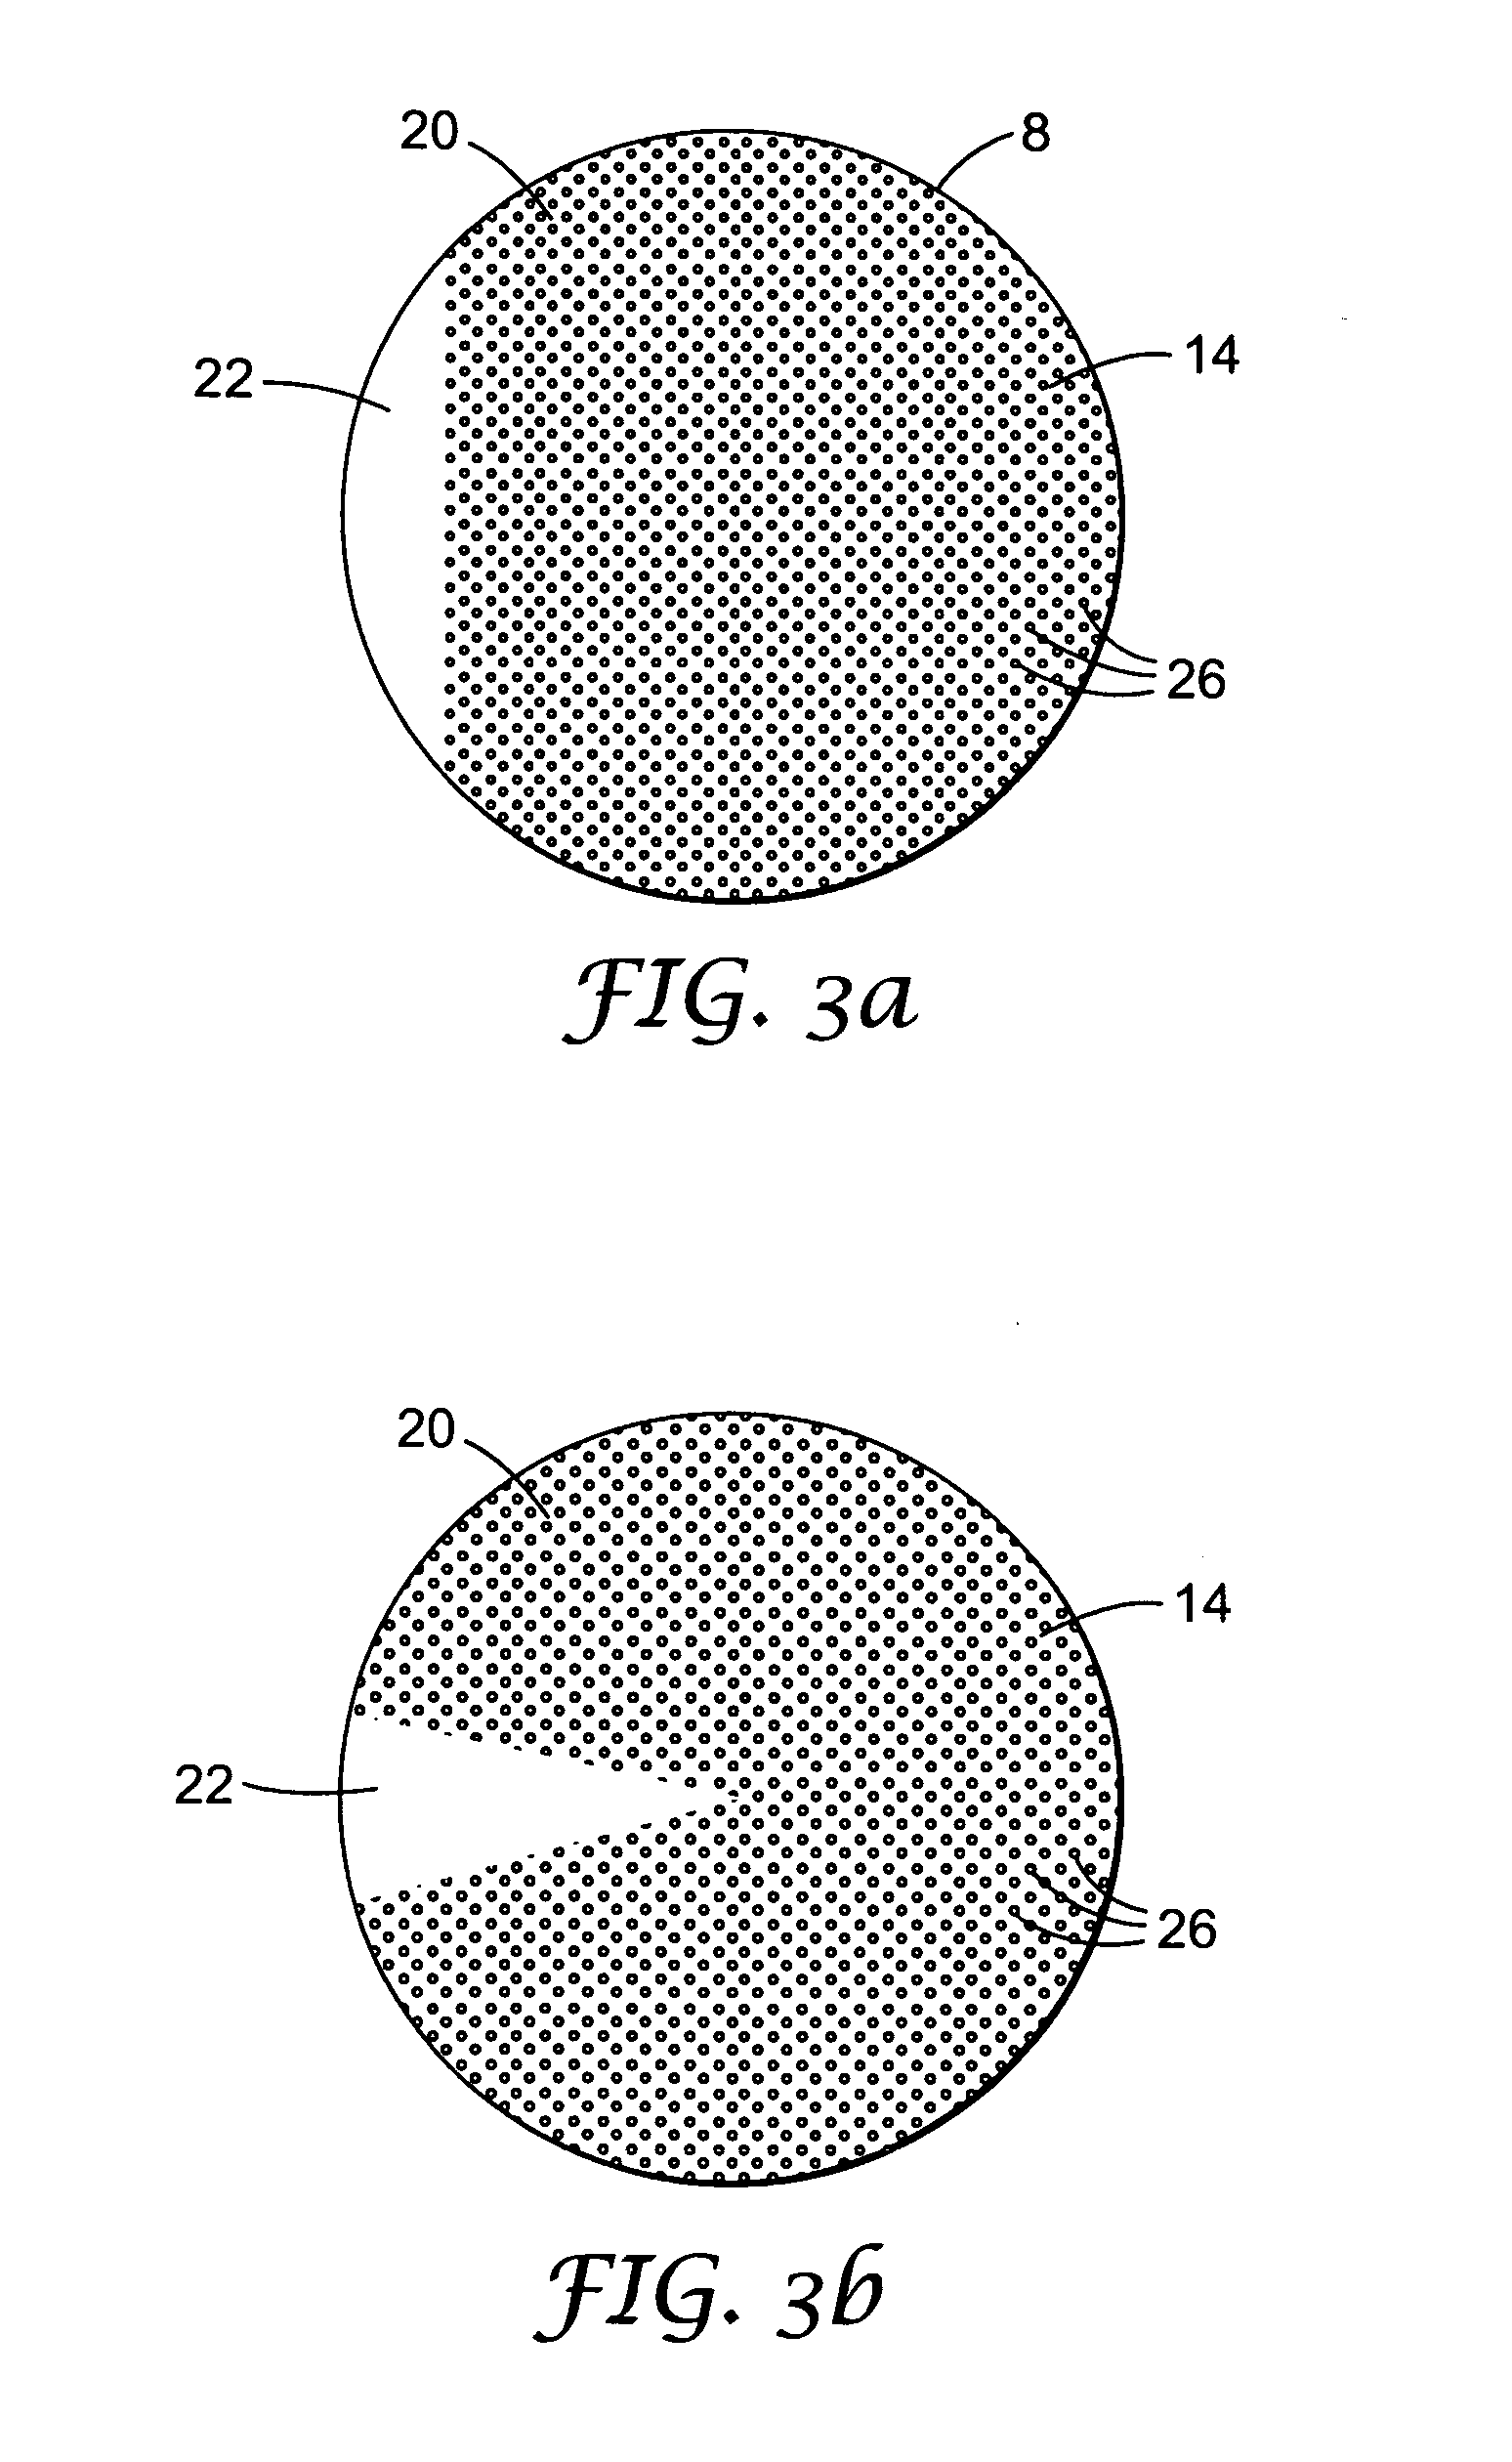 Attachment system for a sanding tool